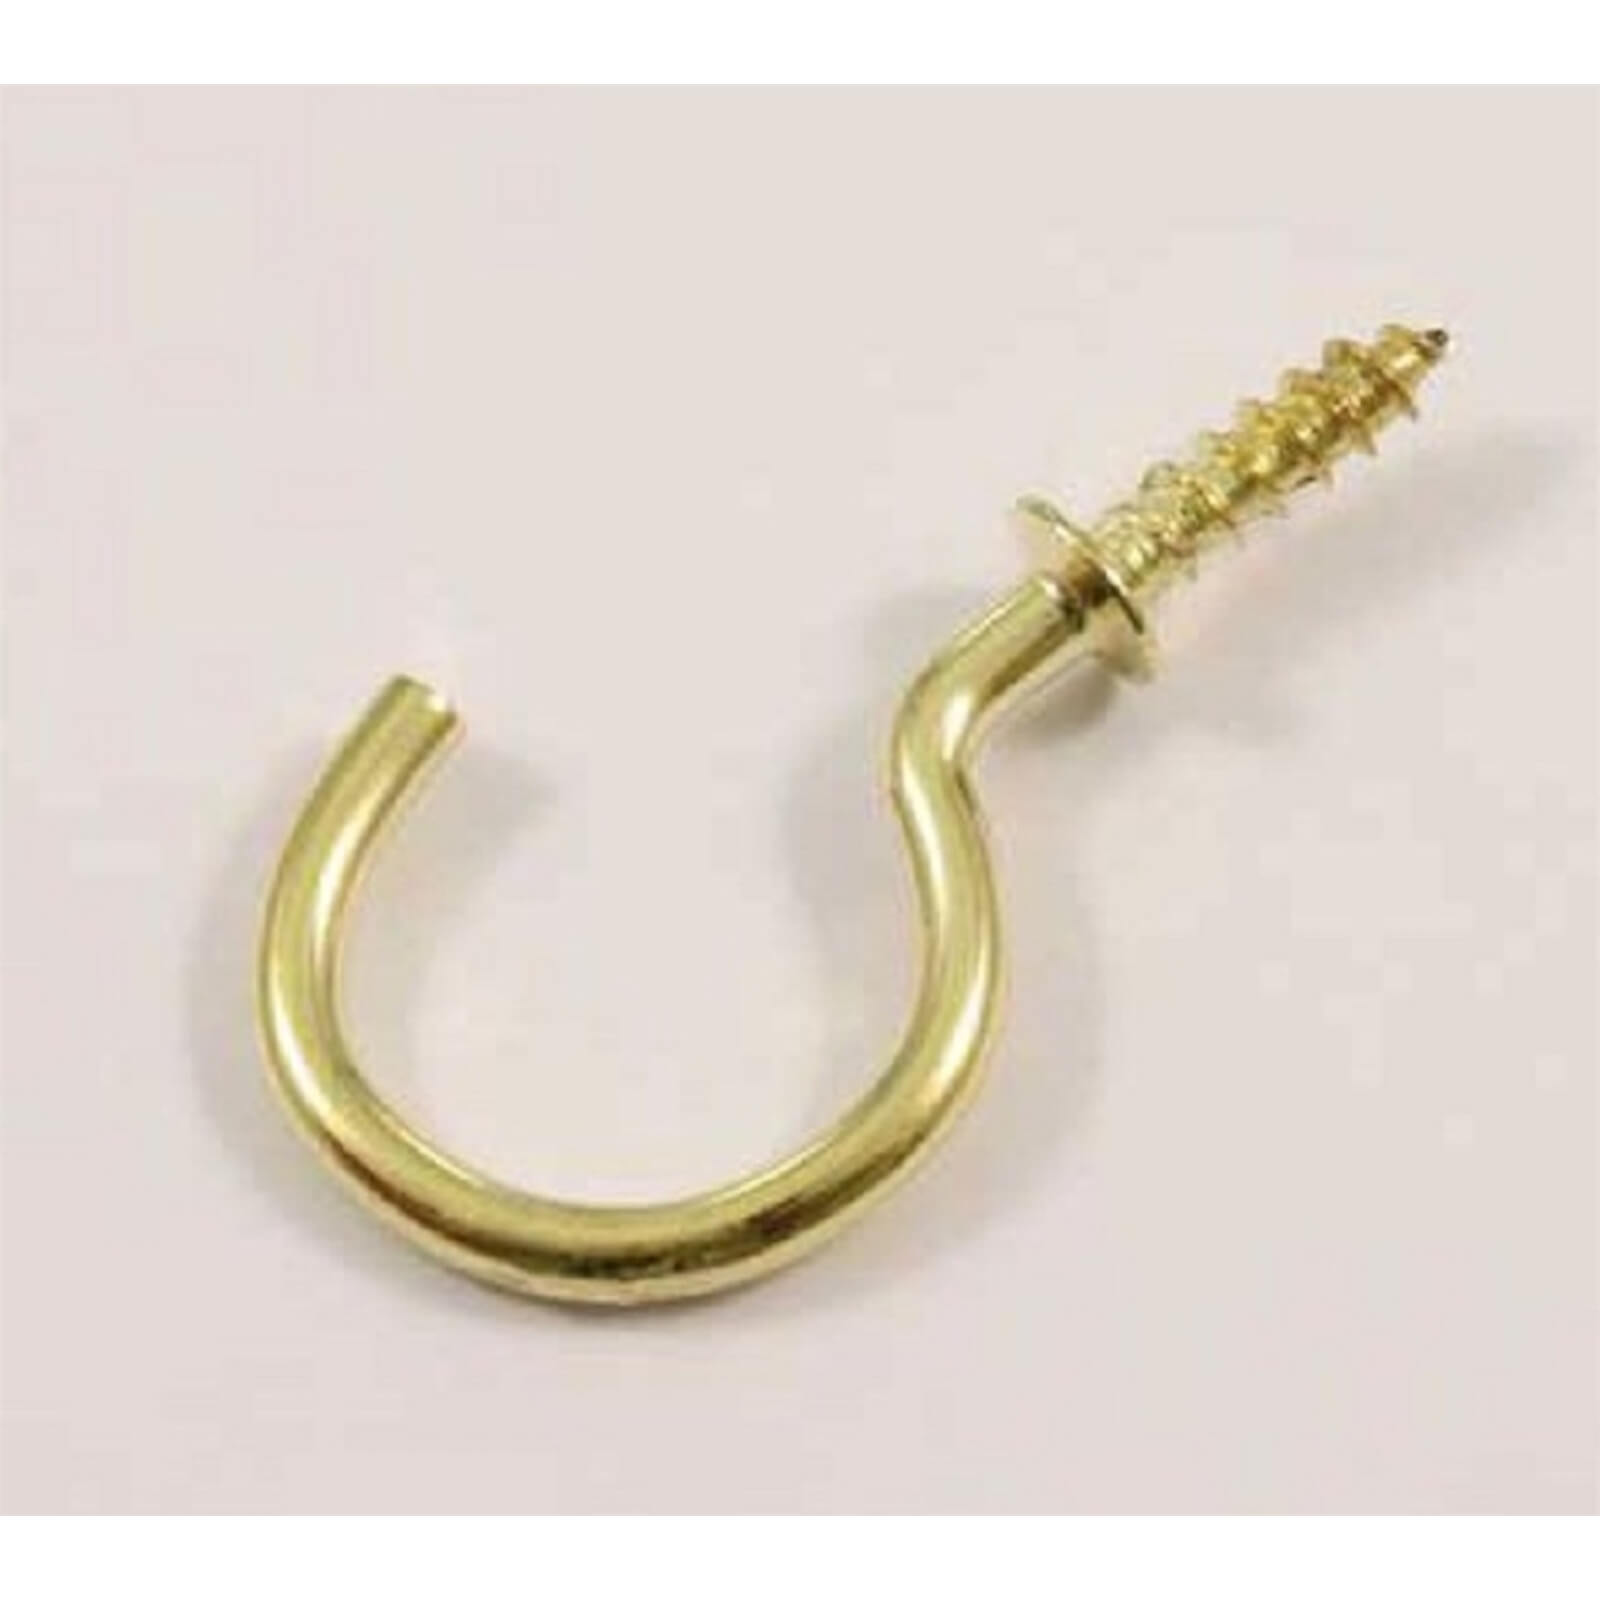 Photo of Round Cup Hook - Brass - 25 Pack